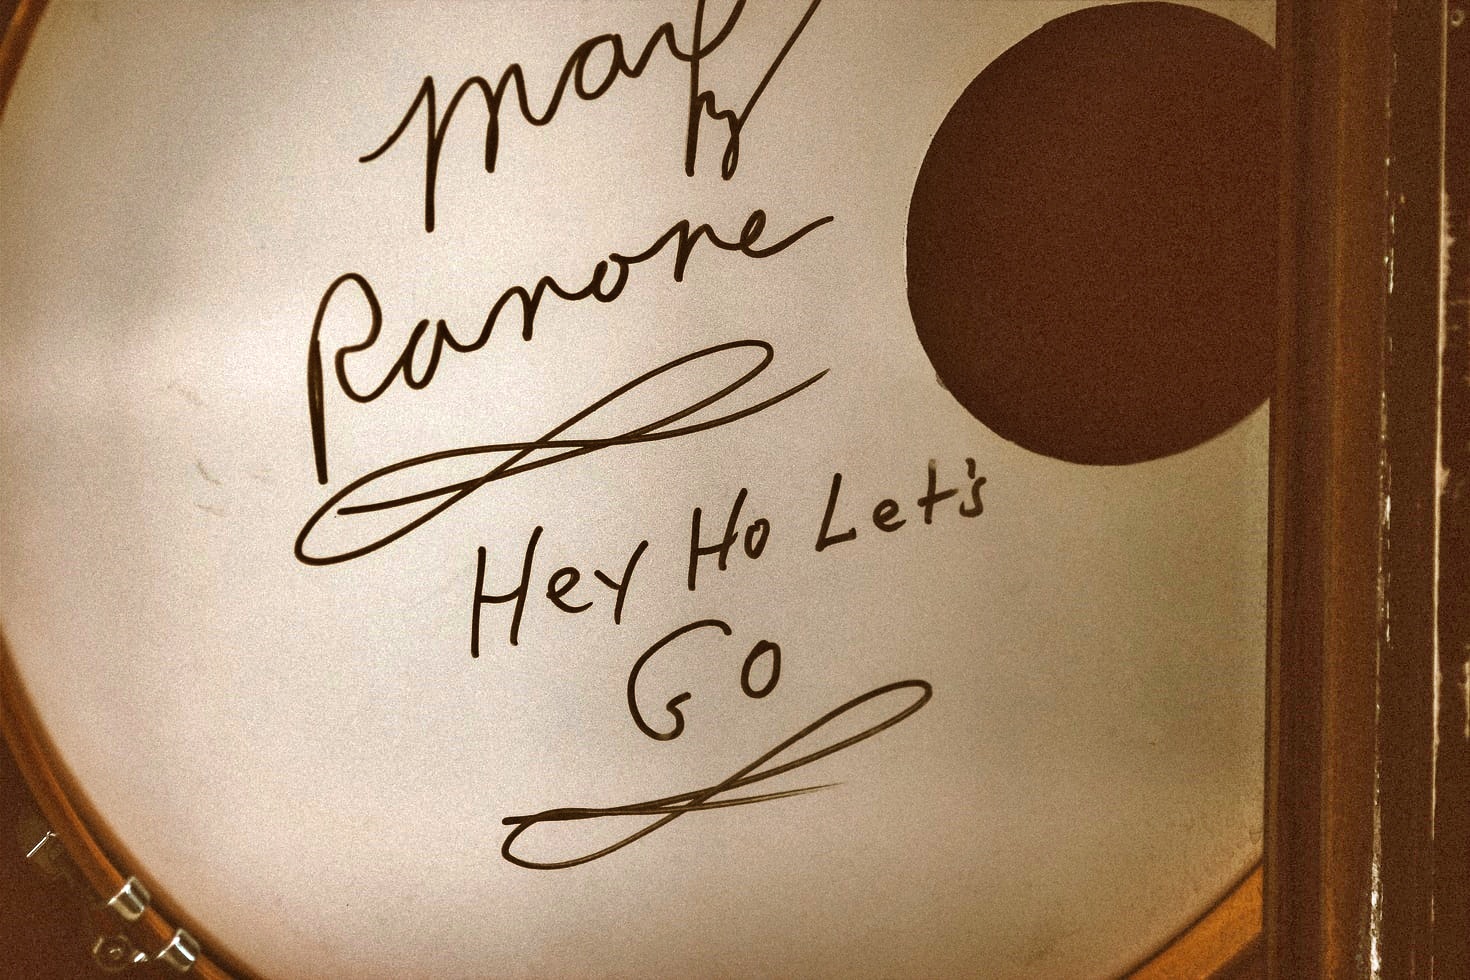 A picture of an autographed kick drum from Marky Ramone, including the phrase "Hey Ho Let's Go"